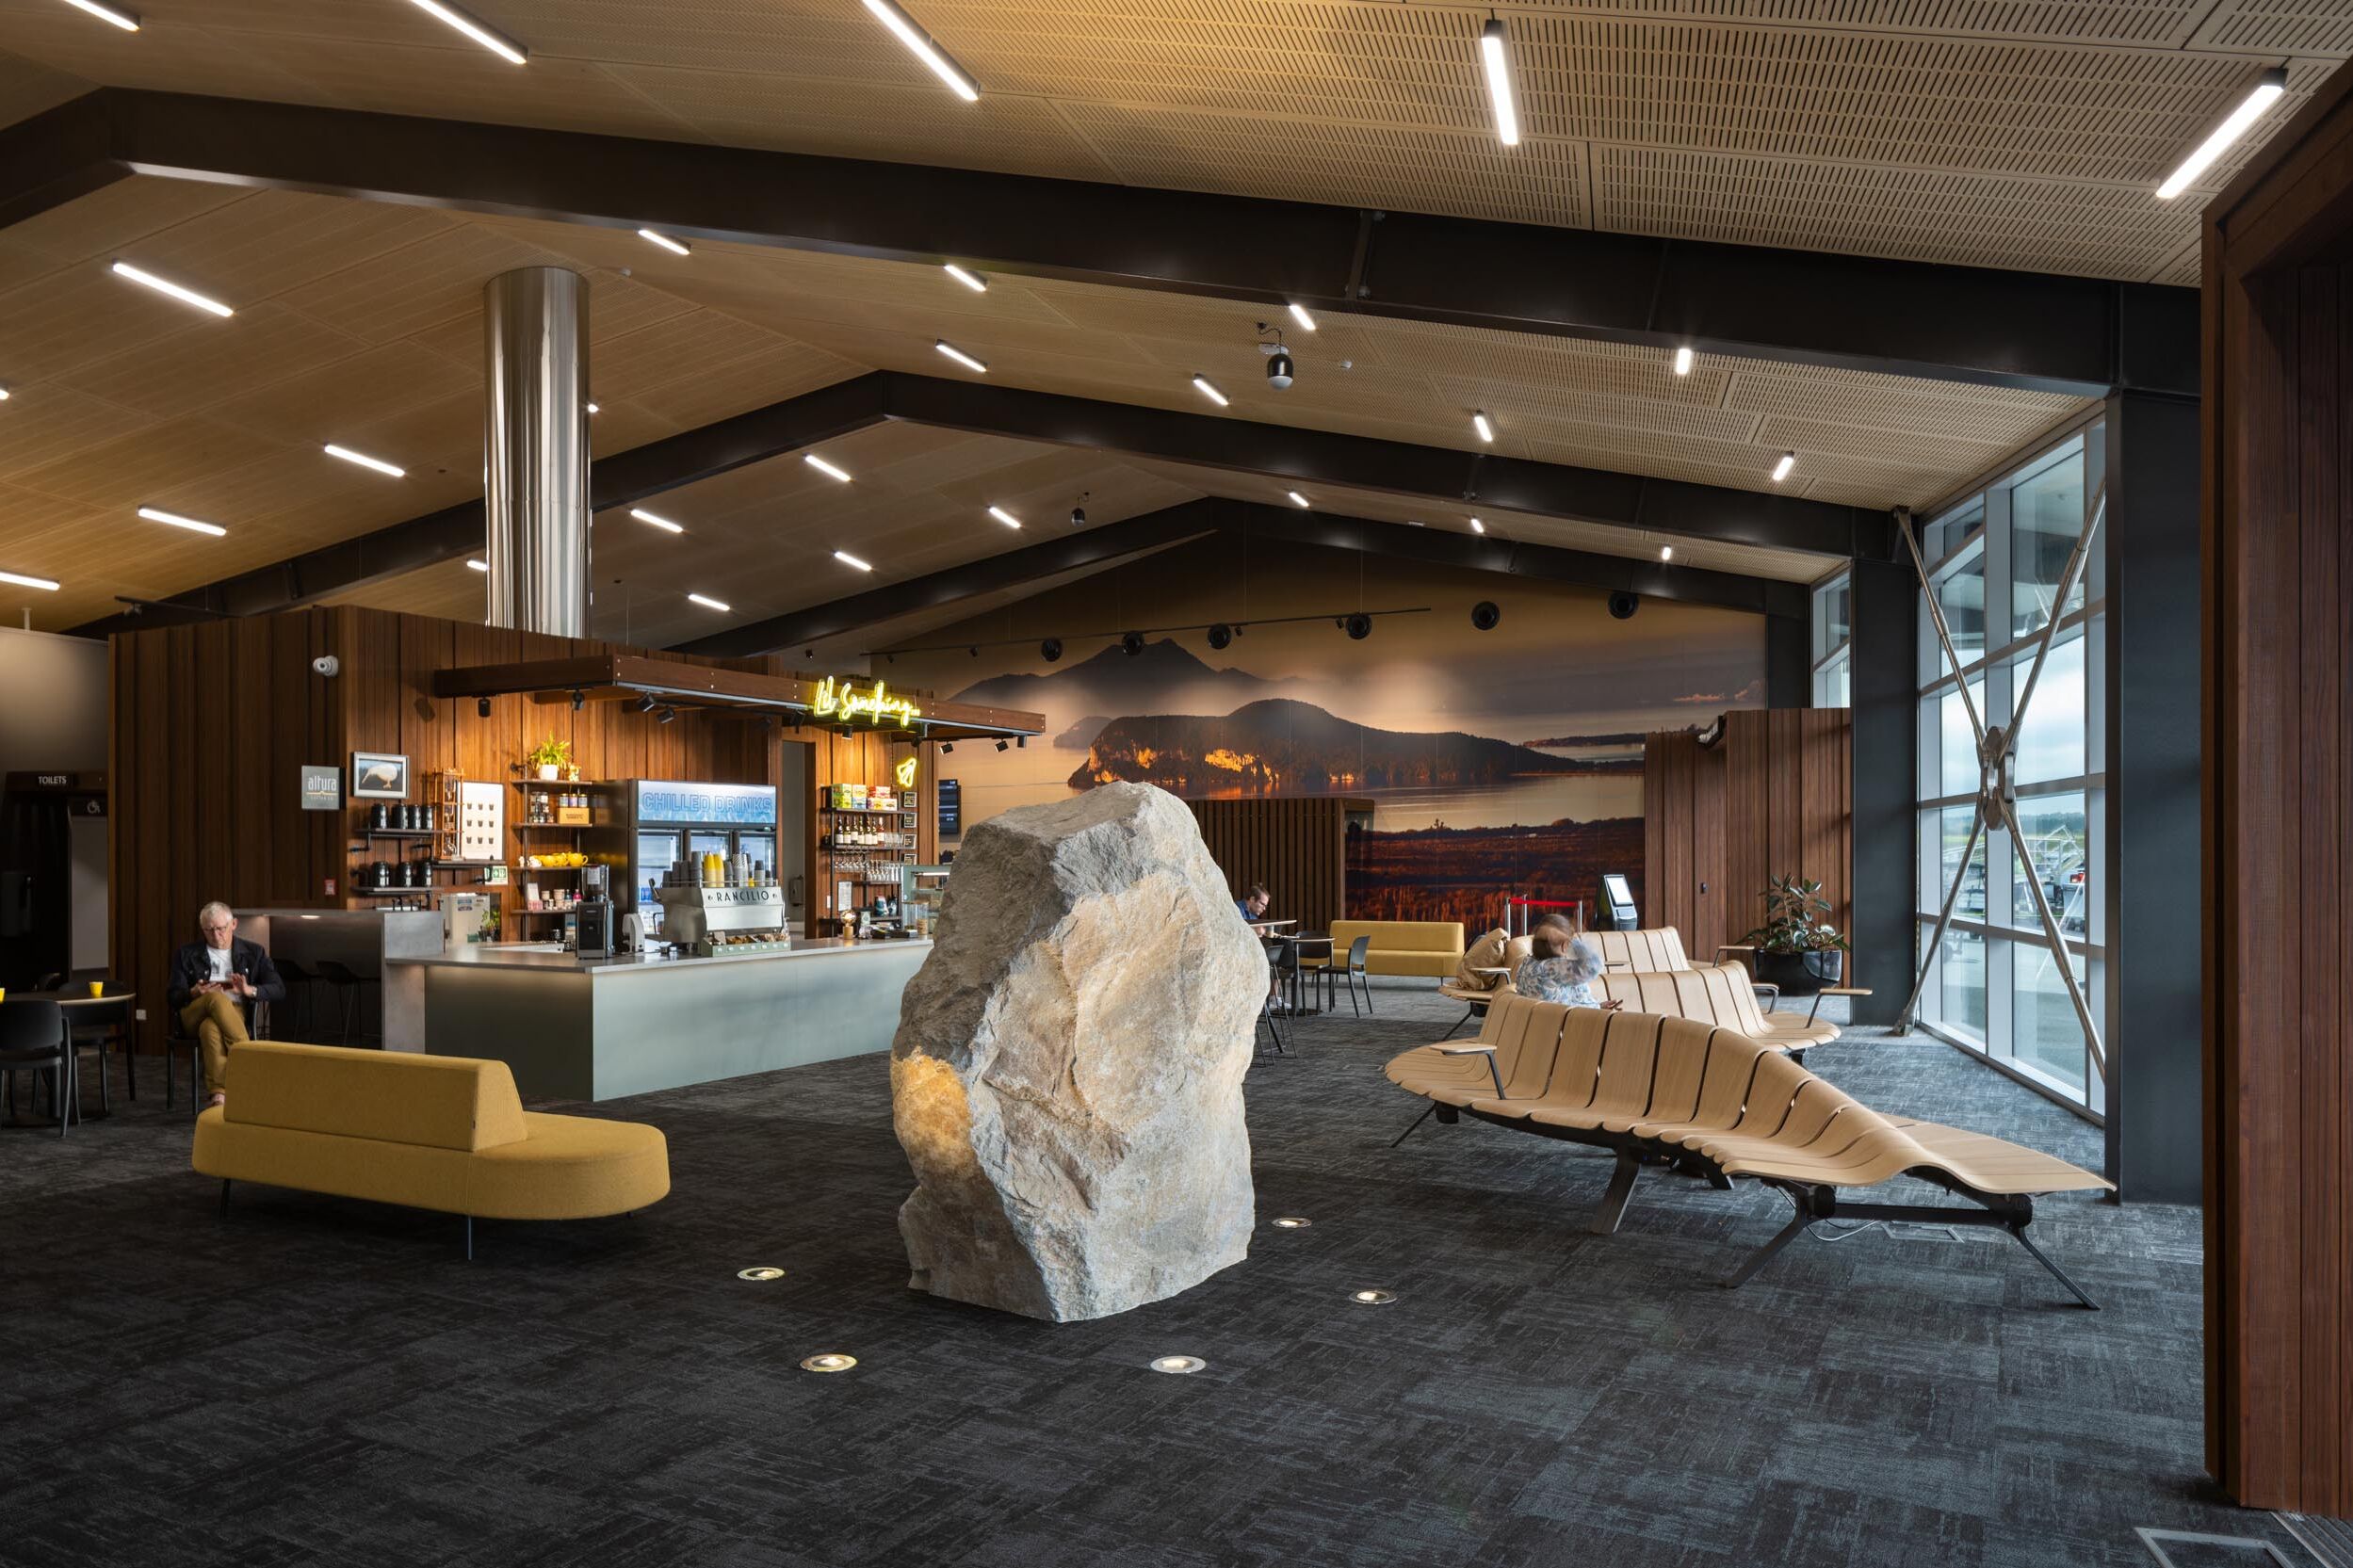 Taupo Airport Shelter Architect 